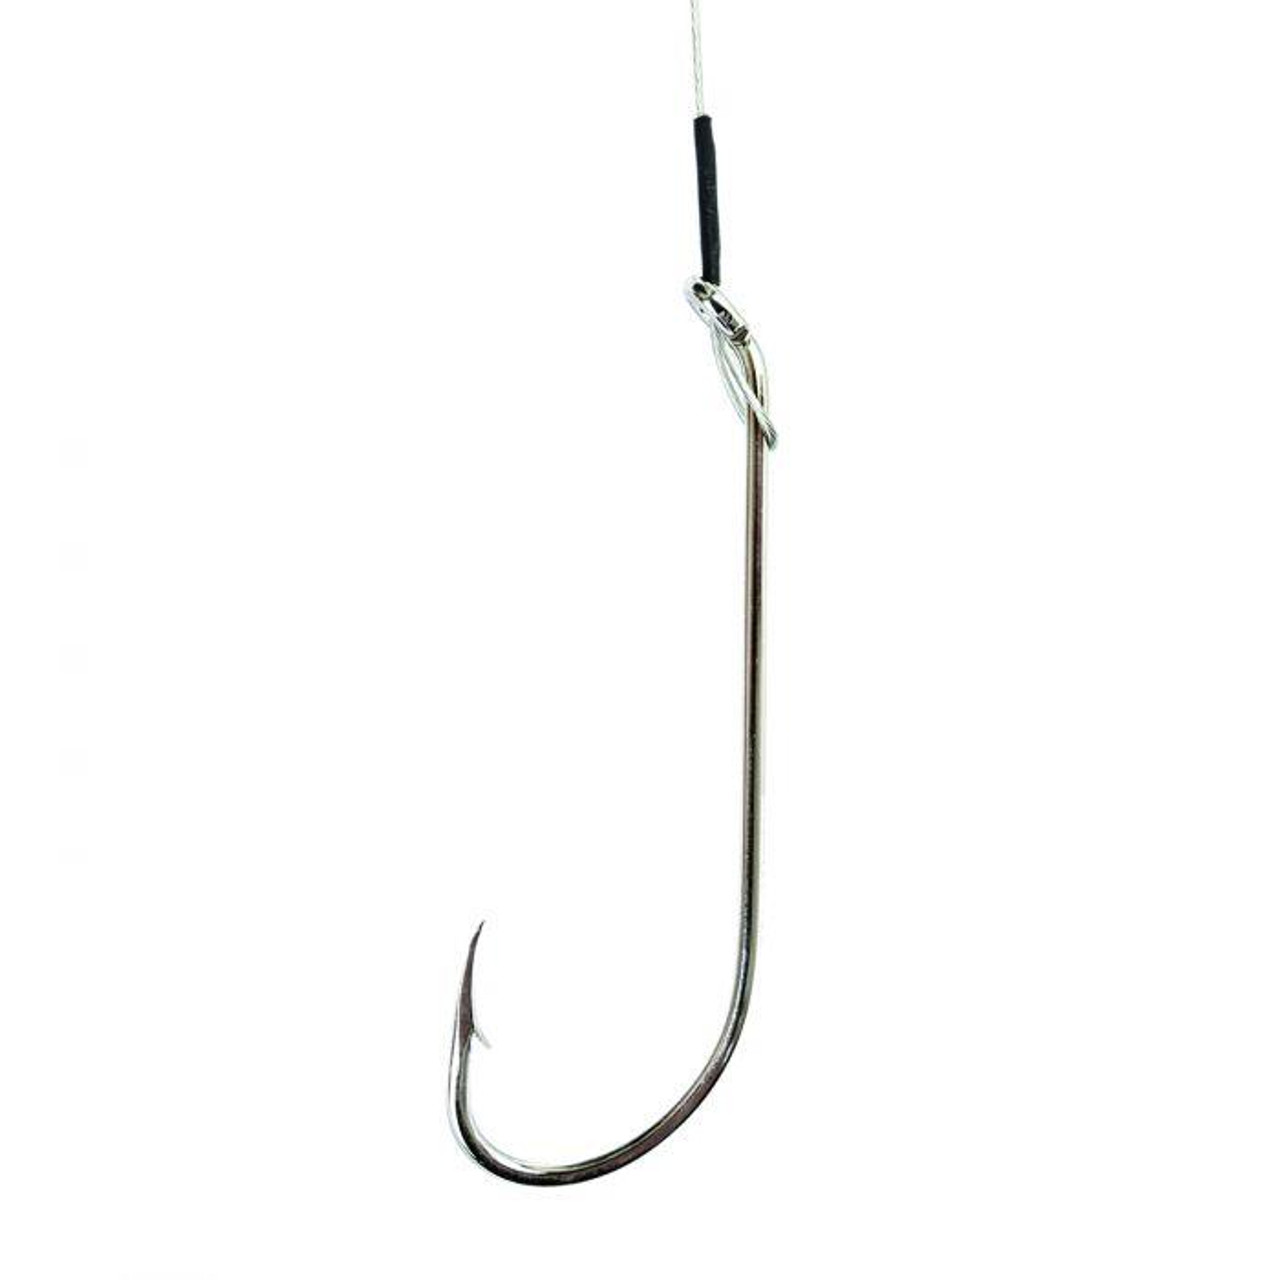 Eagle Claw Long Plain Shank Nylawire Snell Hook - 5 Pack - Dance's